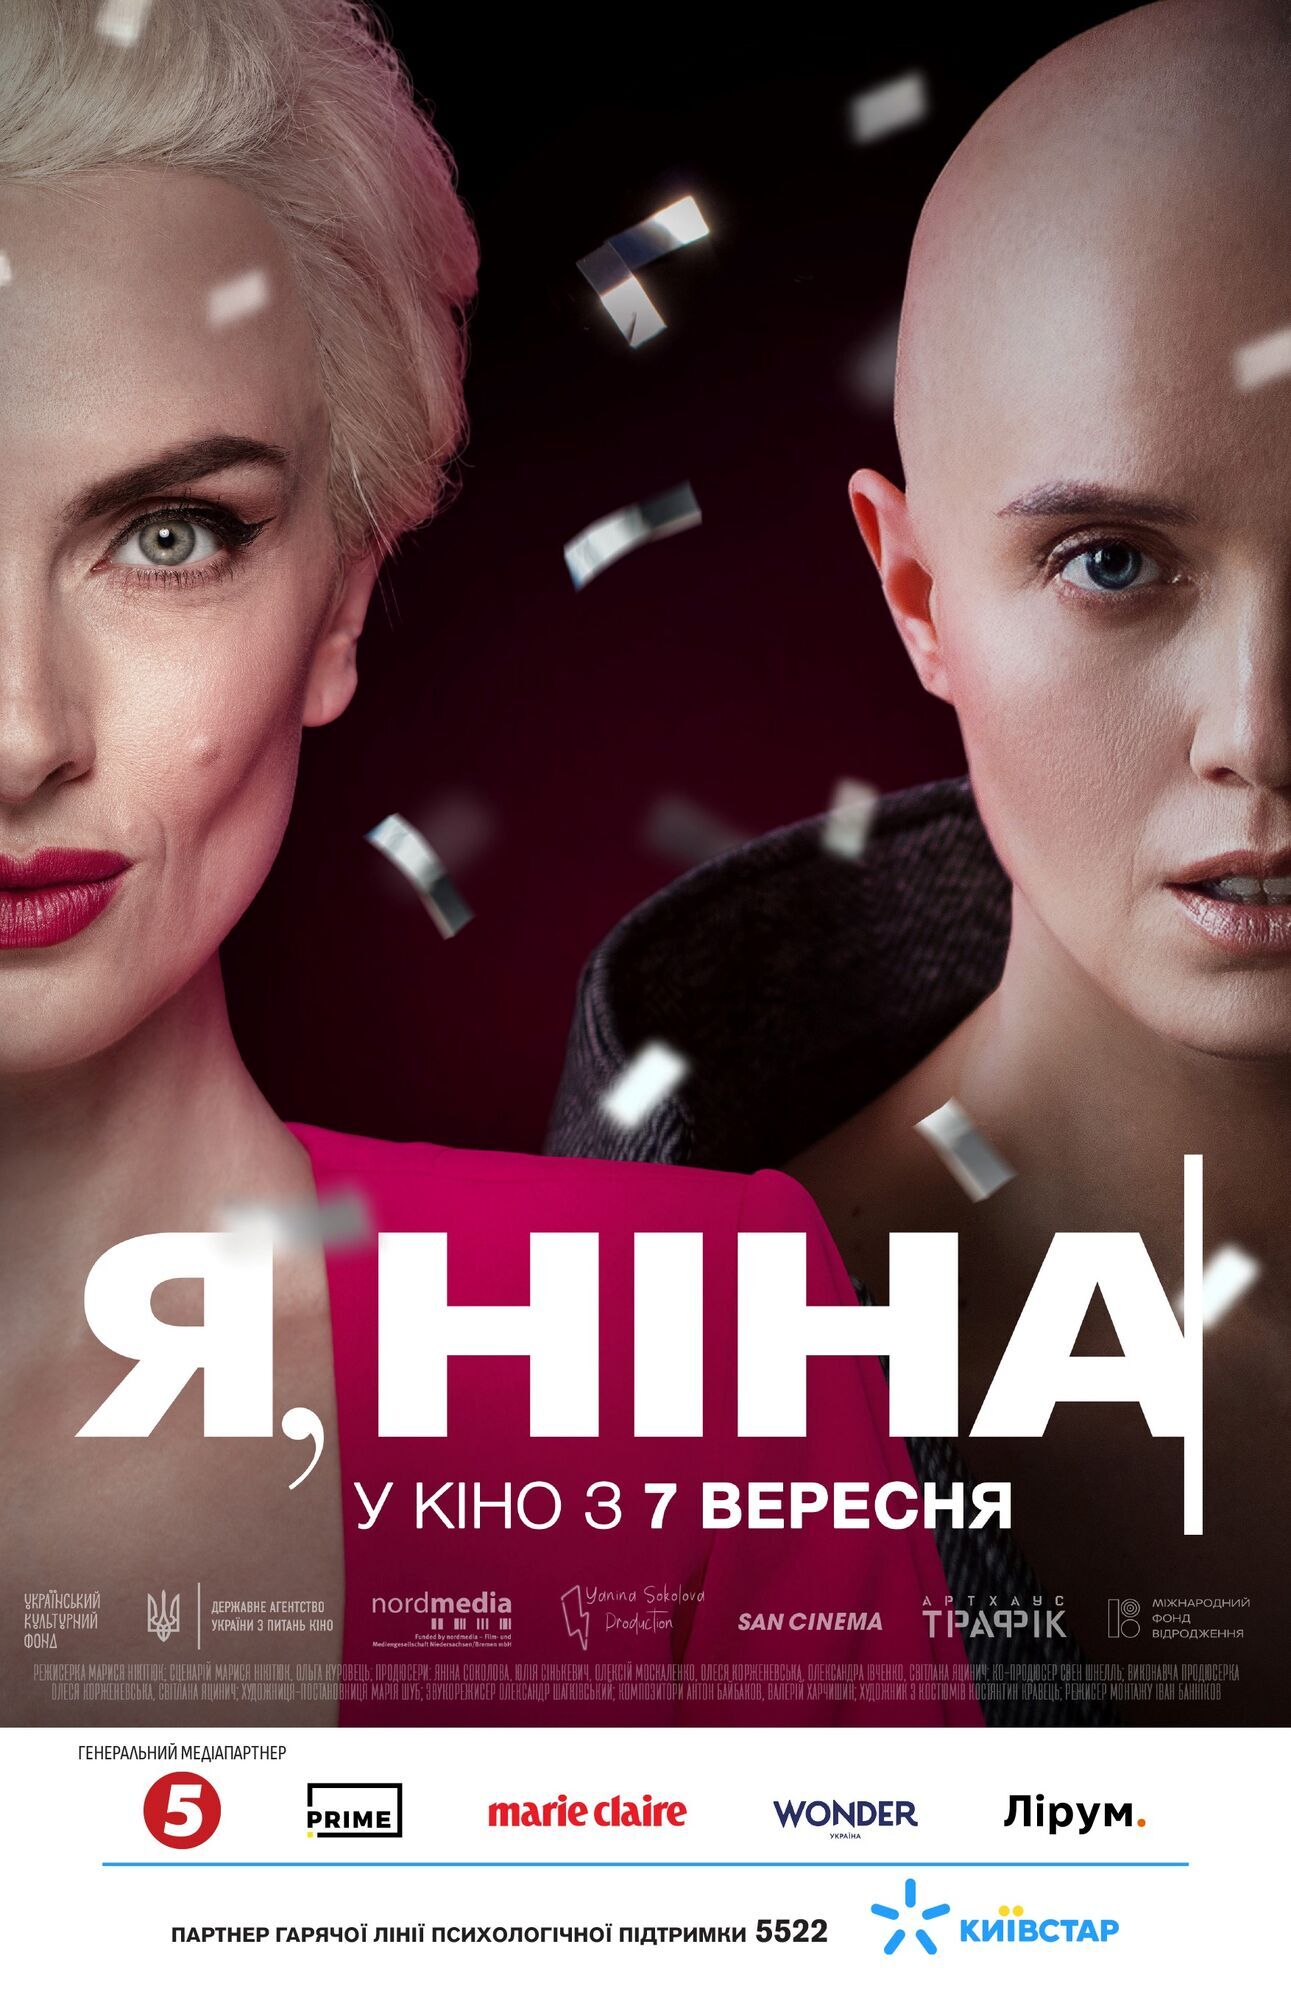 Based on the personal story of Yanina Sokolova: the film ''I, Nina'' will be released in theaters in the fall